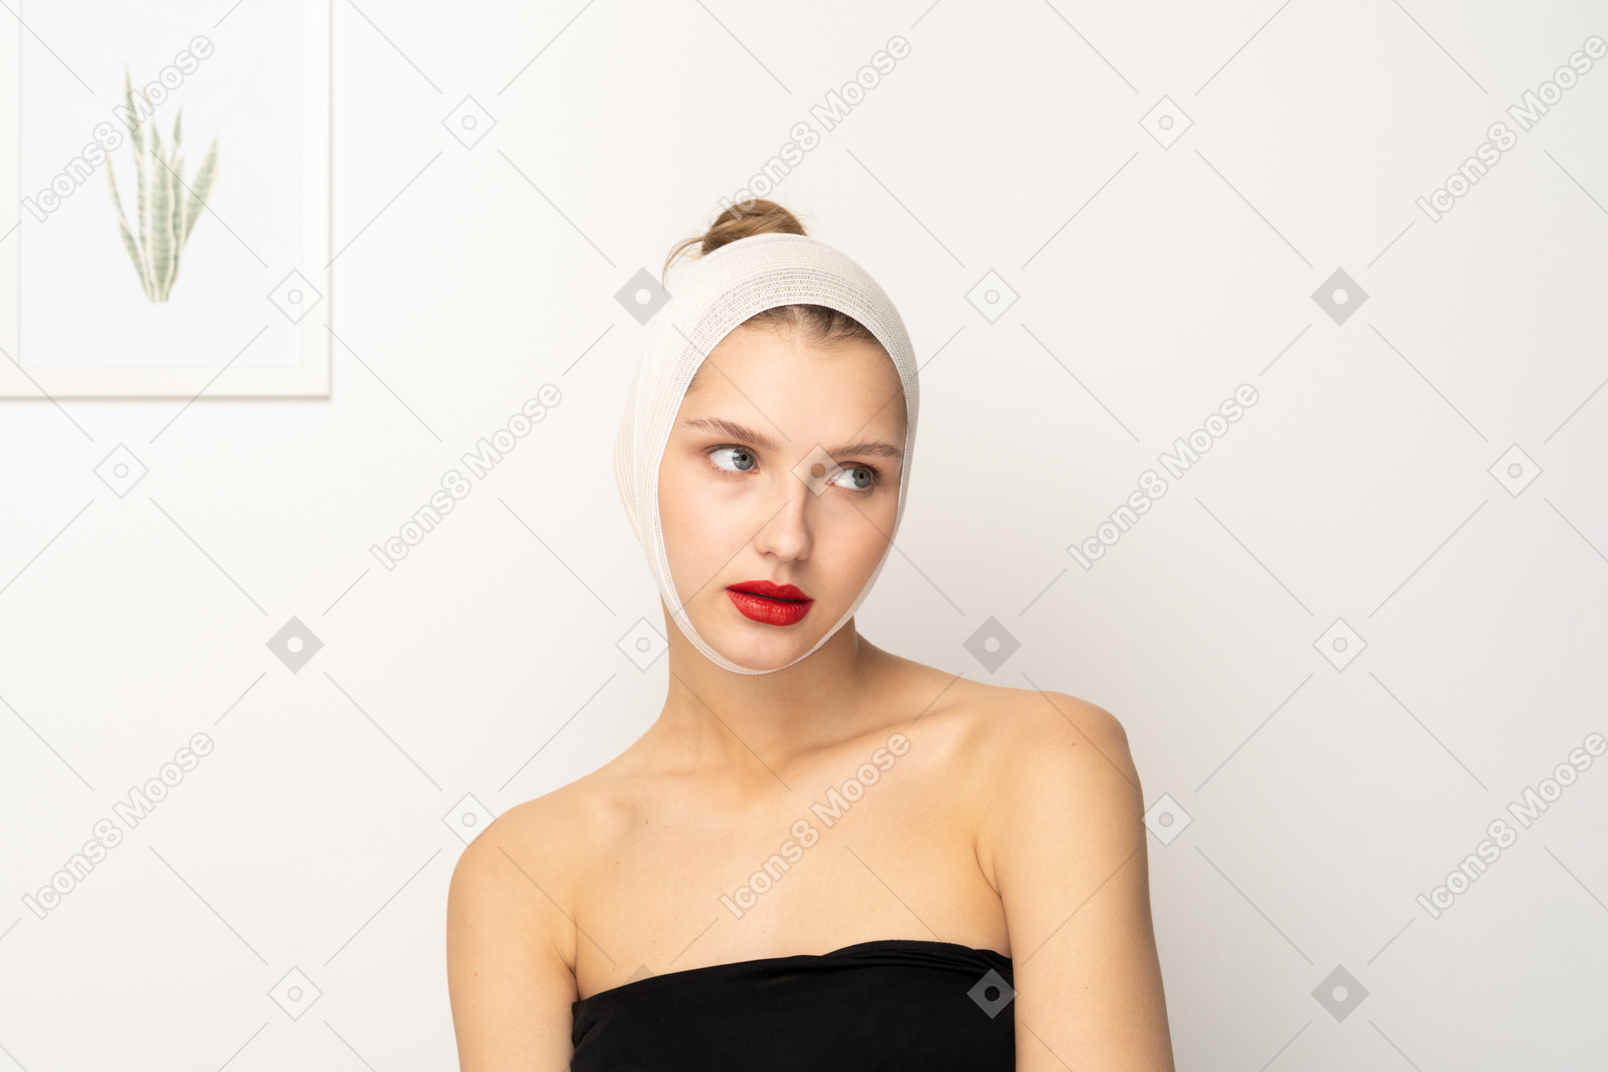 Portrait of a young woman with bandaged head